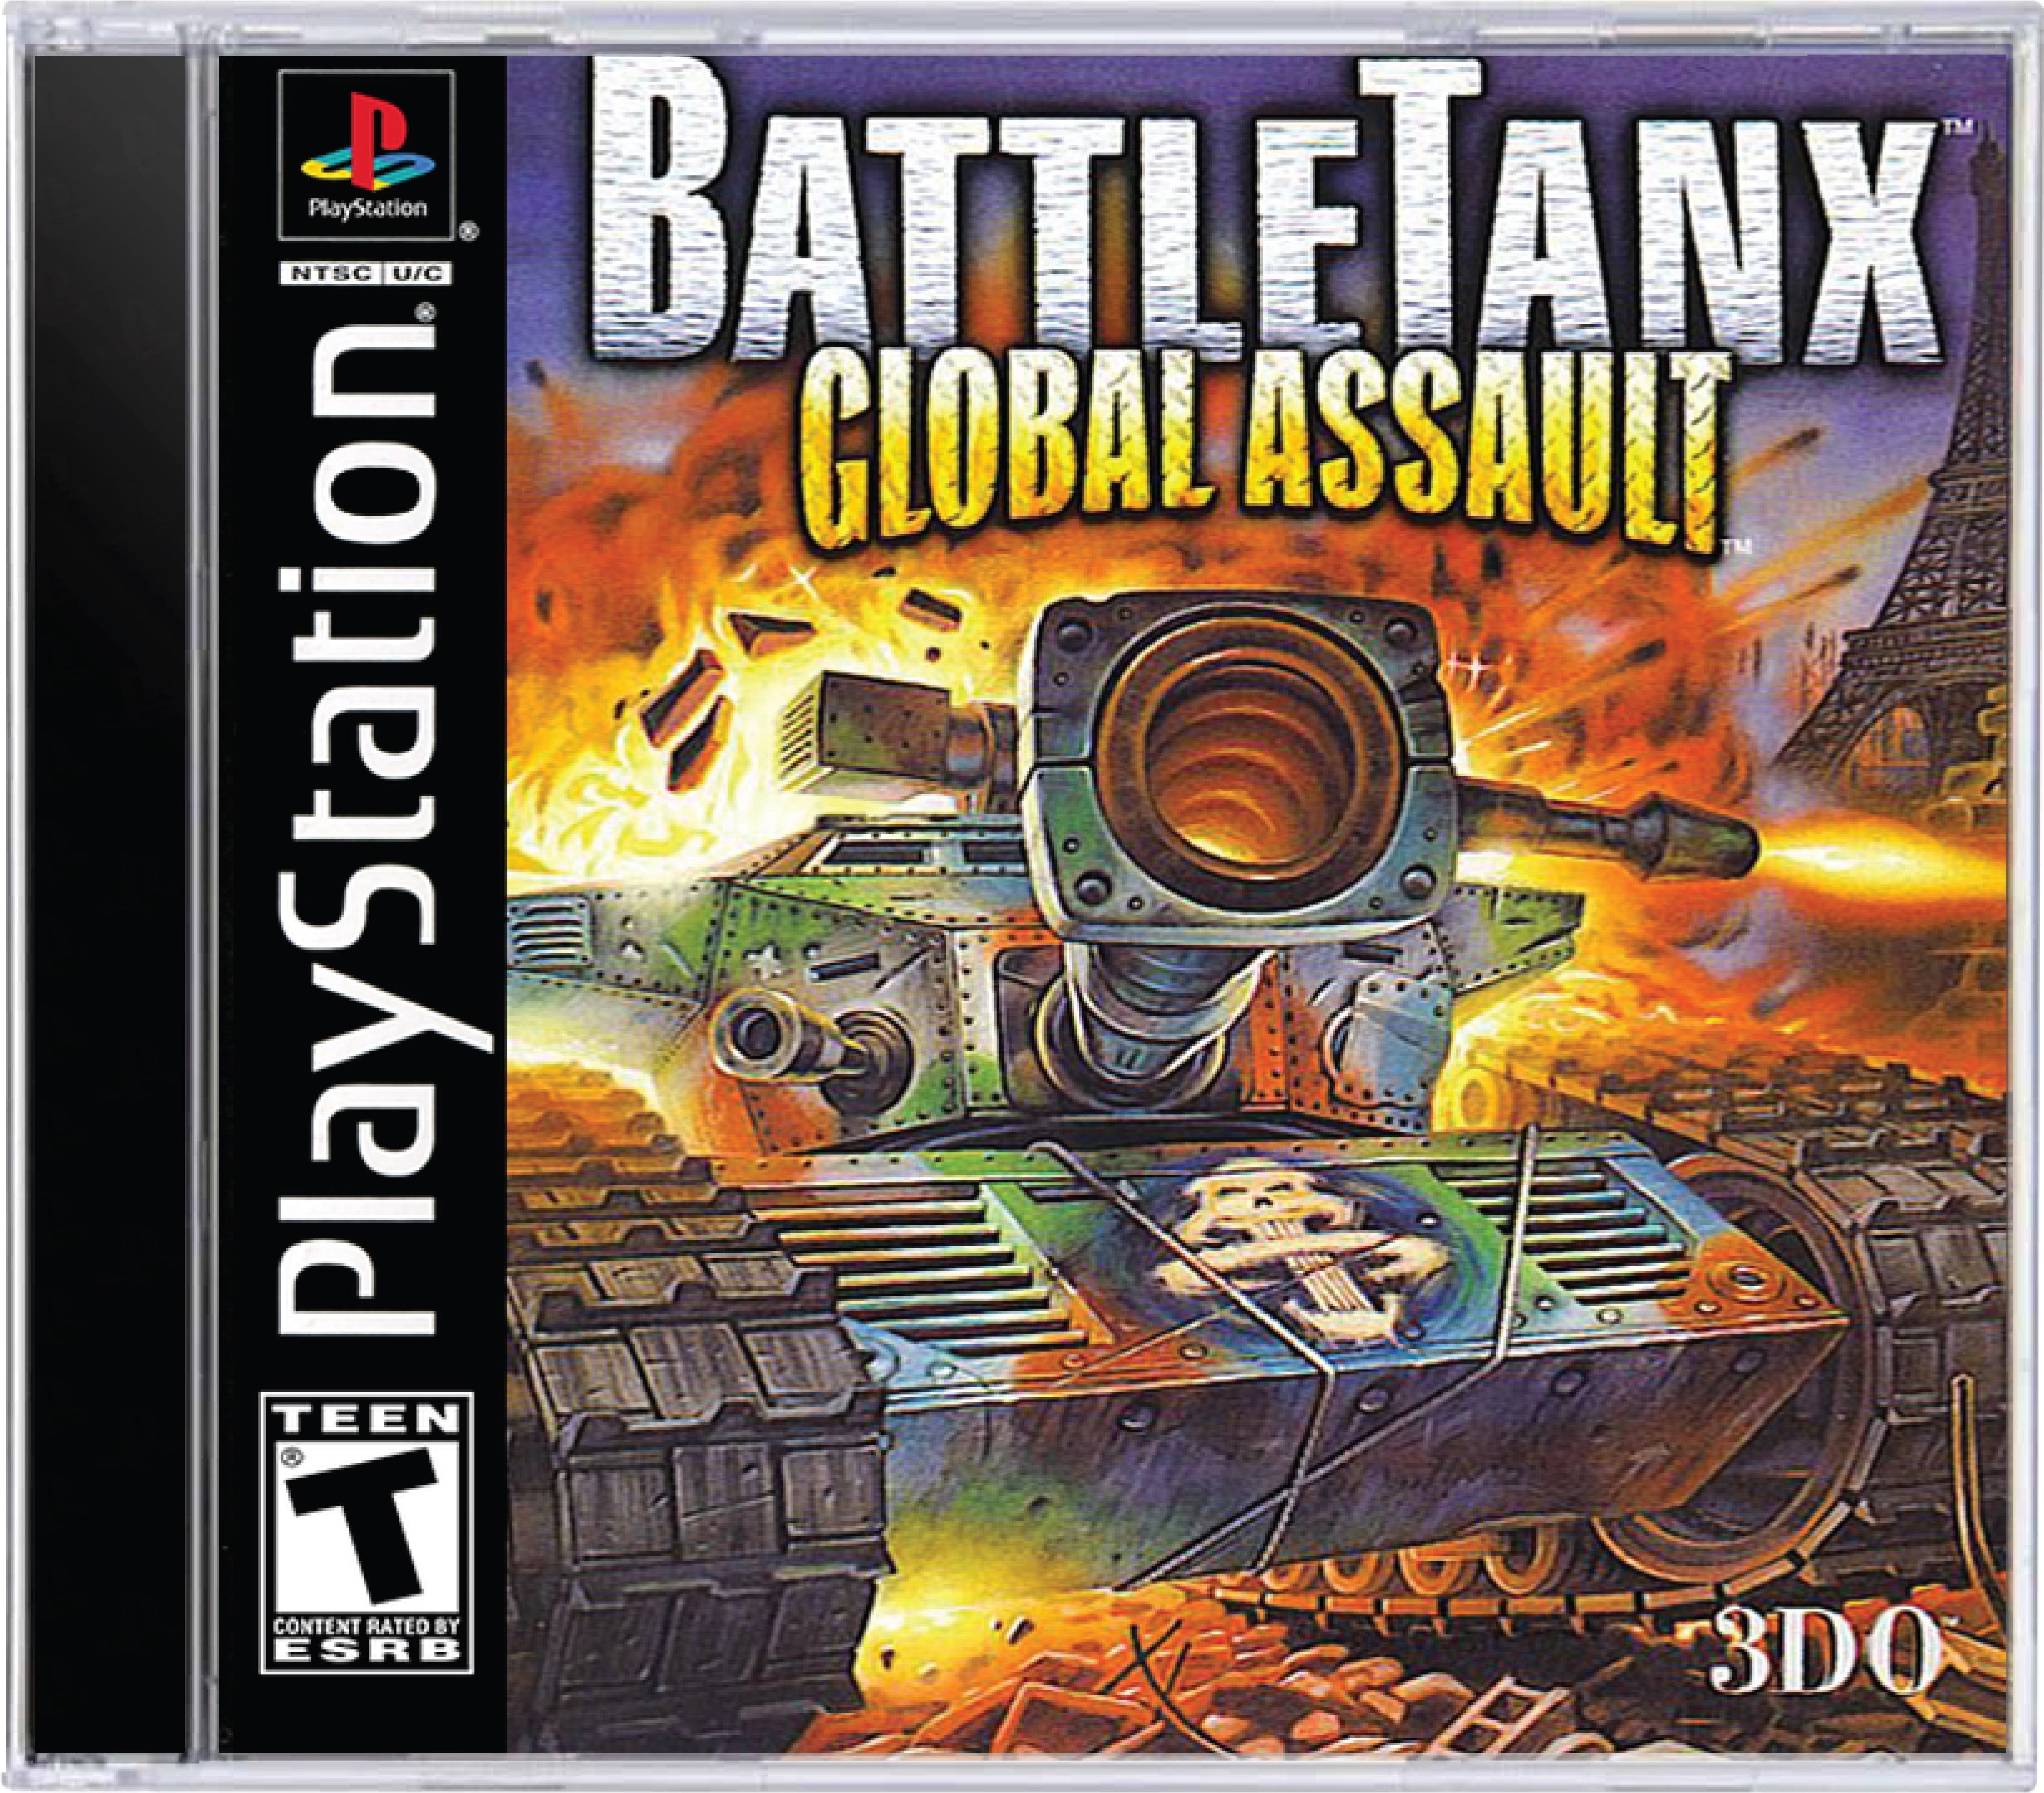 Battletanx Global Assault Cover Art and Product Photo